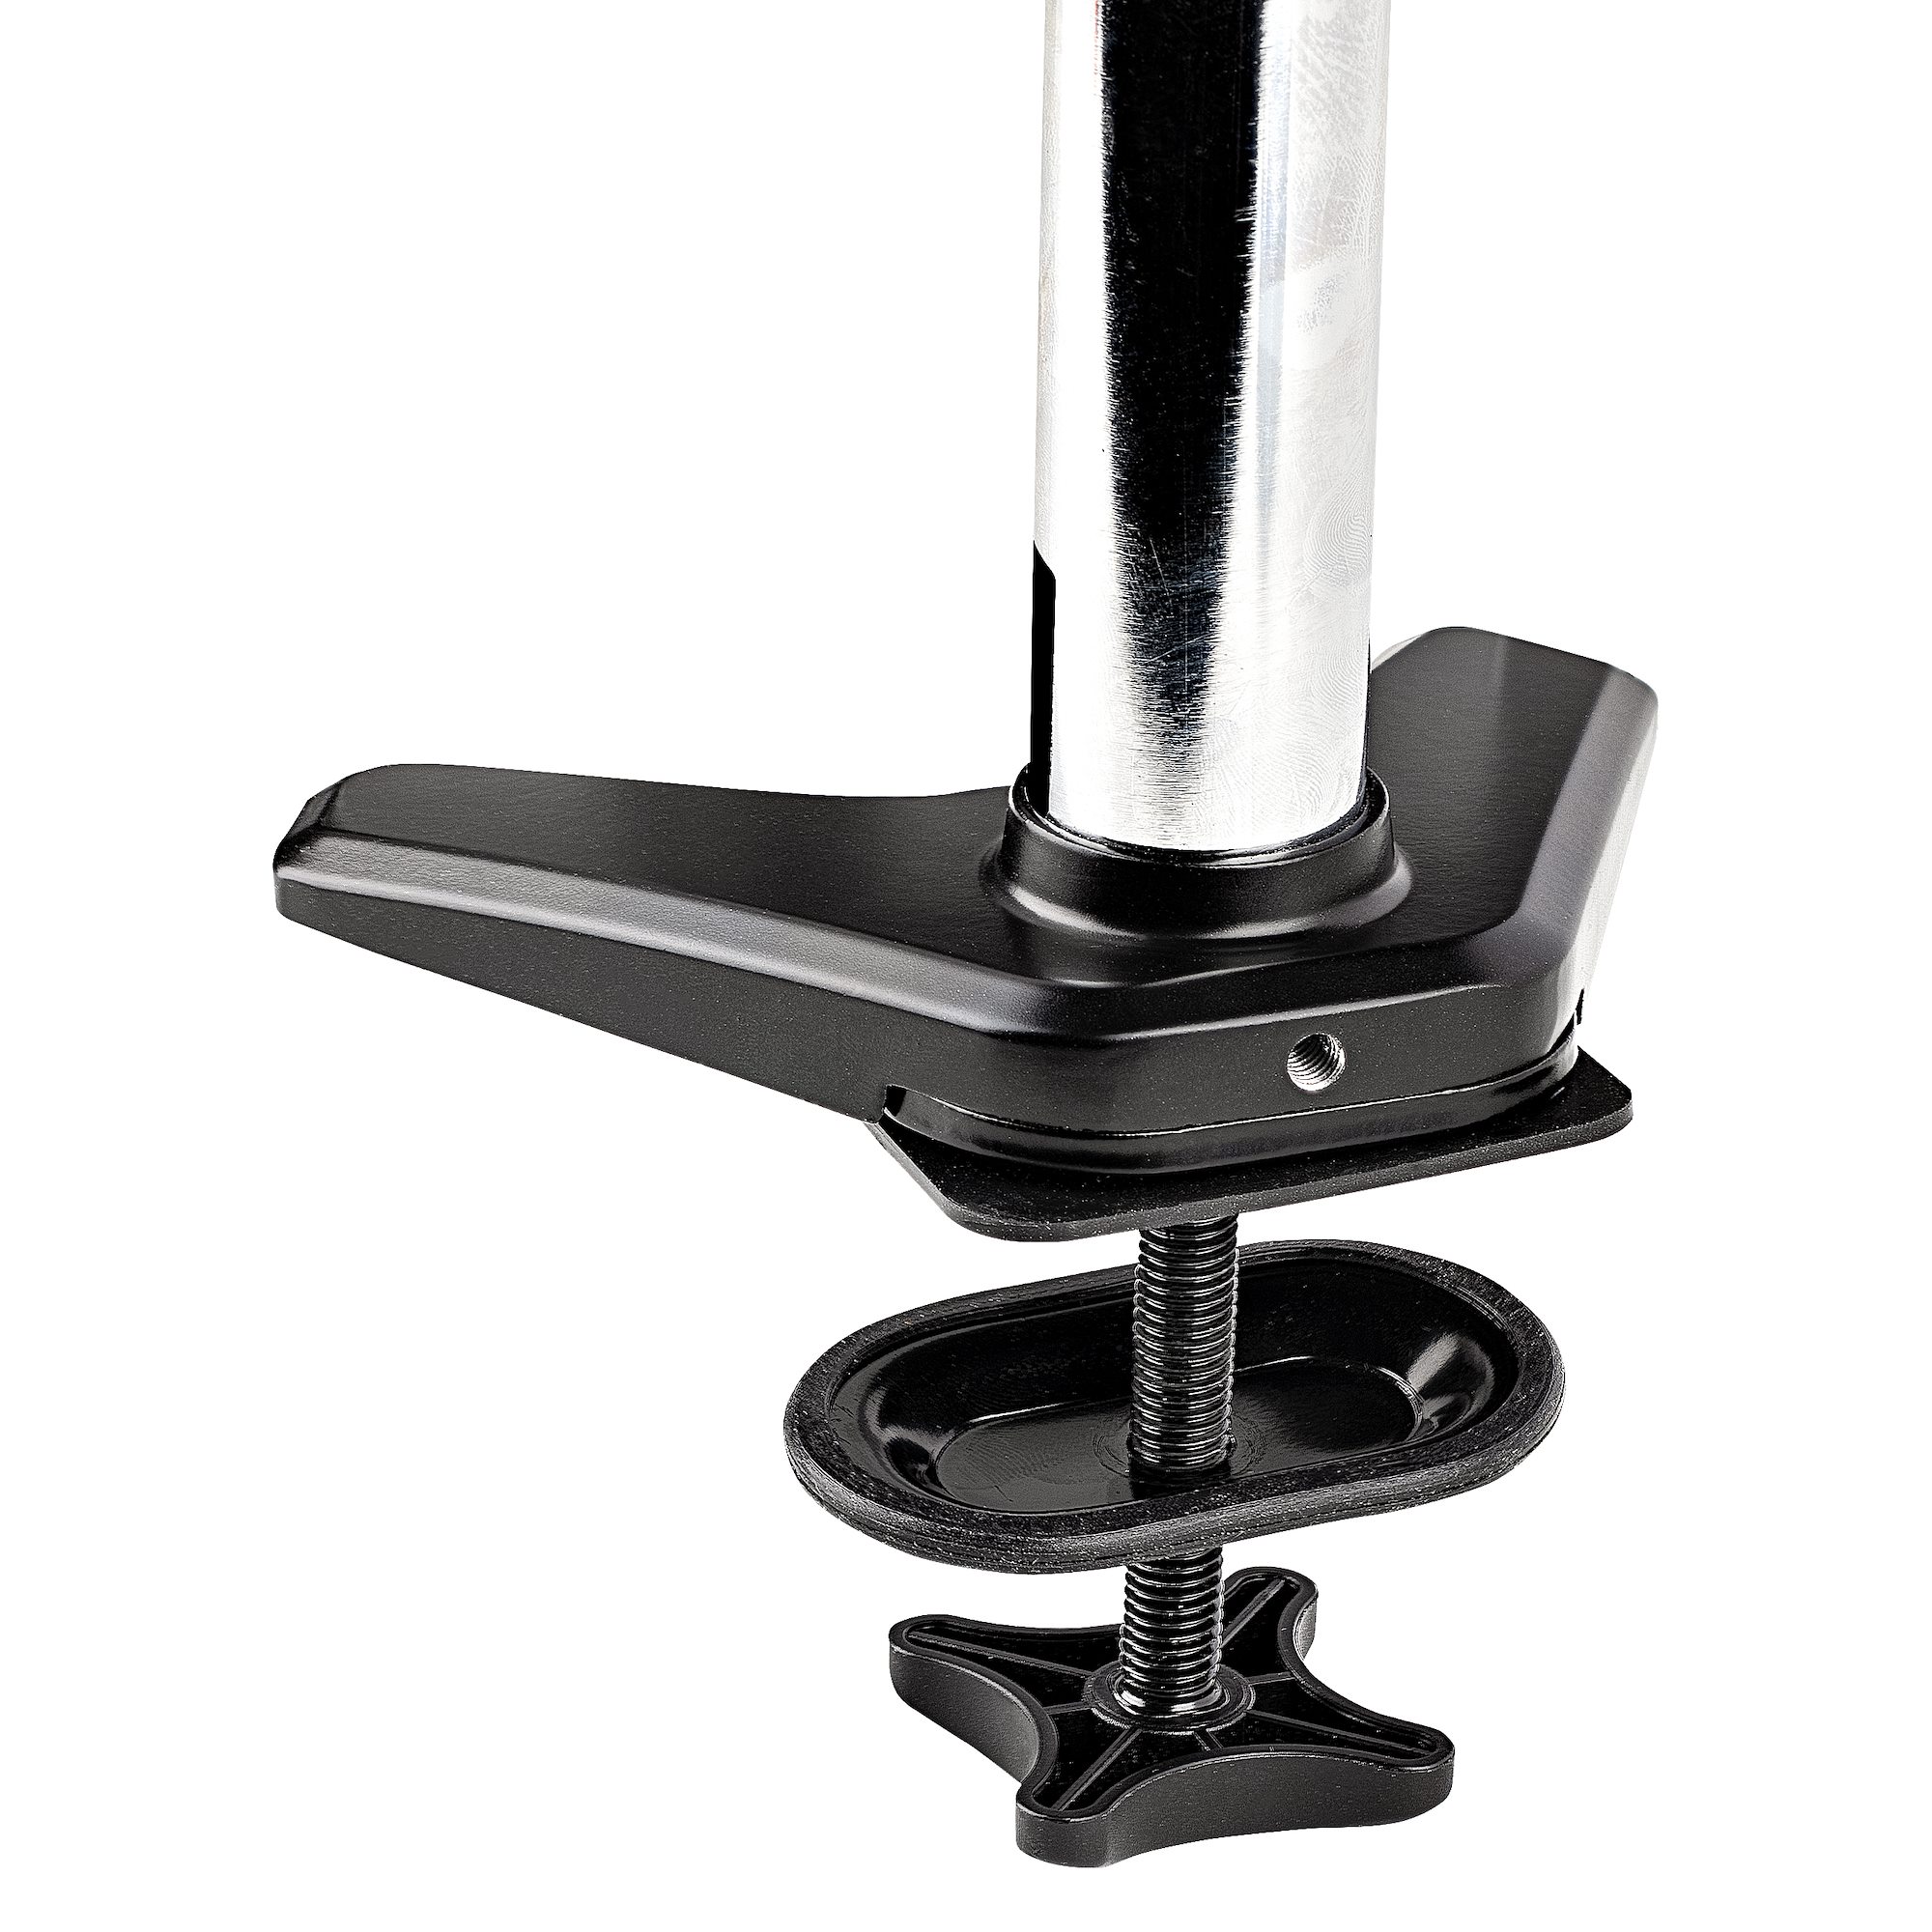 Desk Mount Monitor Arm for 32in Display - Monitor Mounts, Display Mounts  and Ergonomics